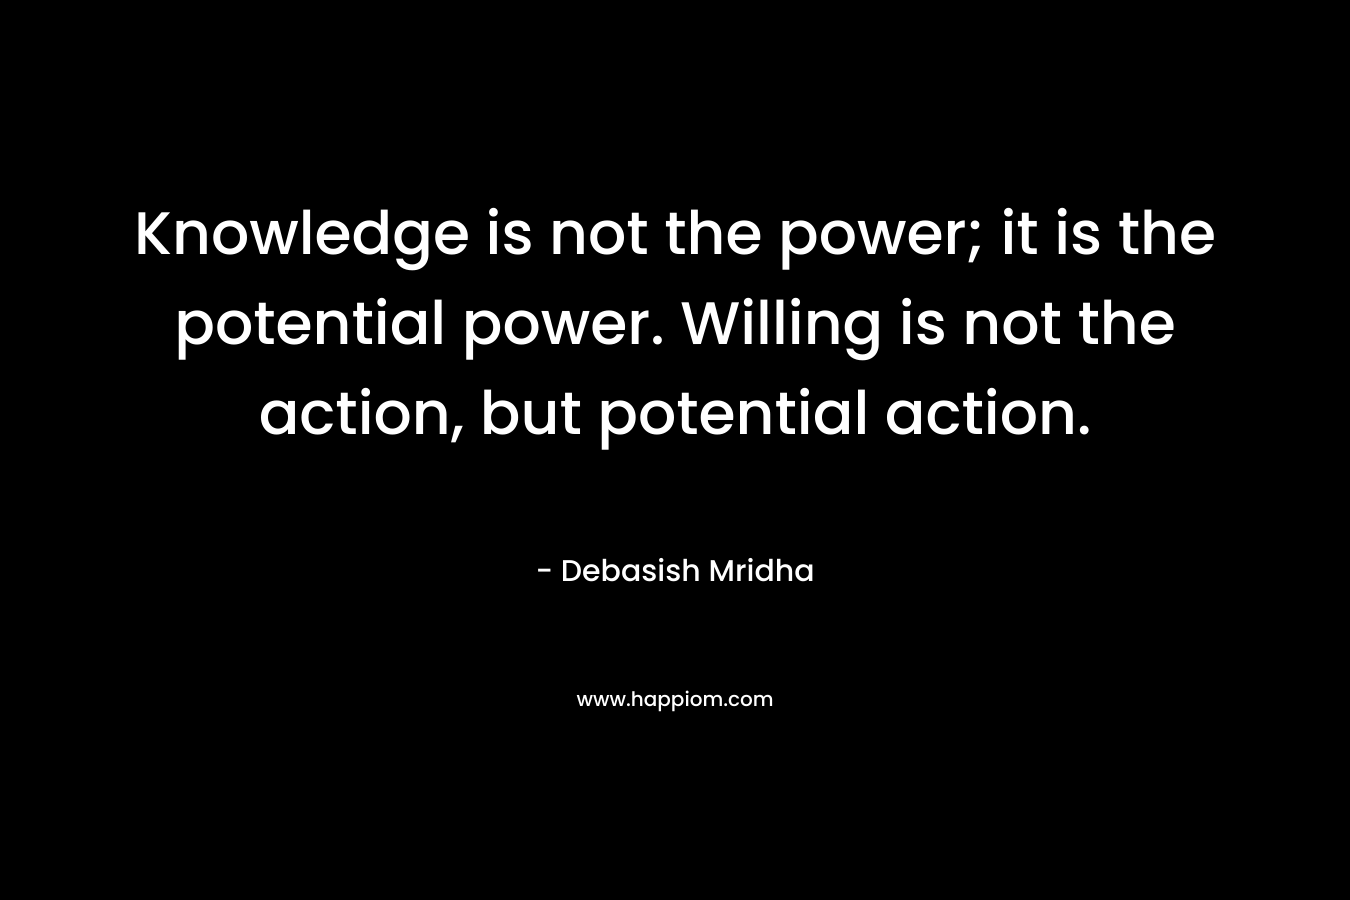 Knowledge is not the power; it is the potential power. Willing is not the action, but potential action.